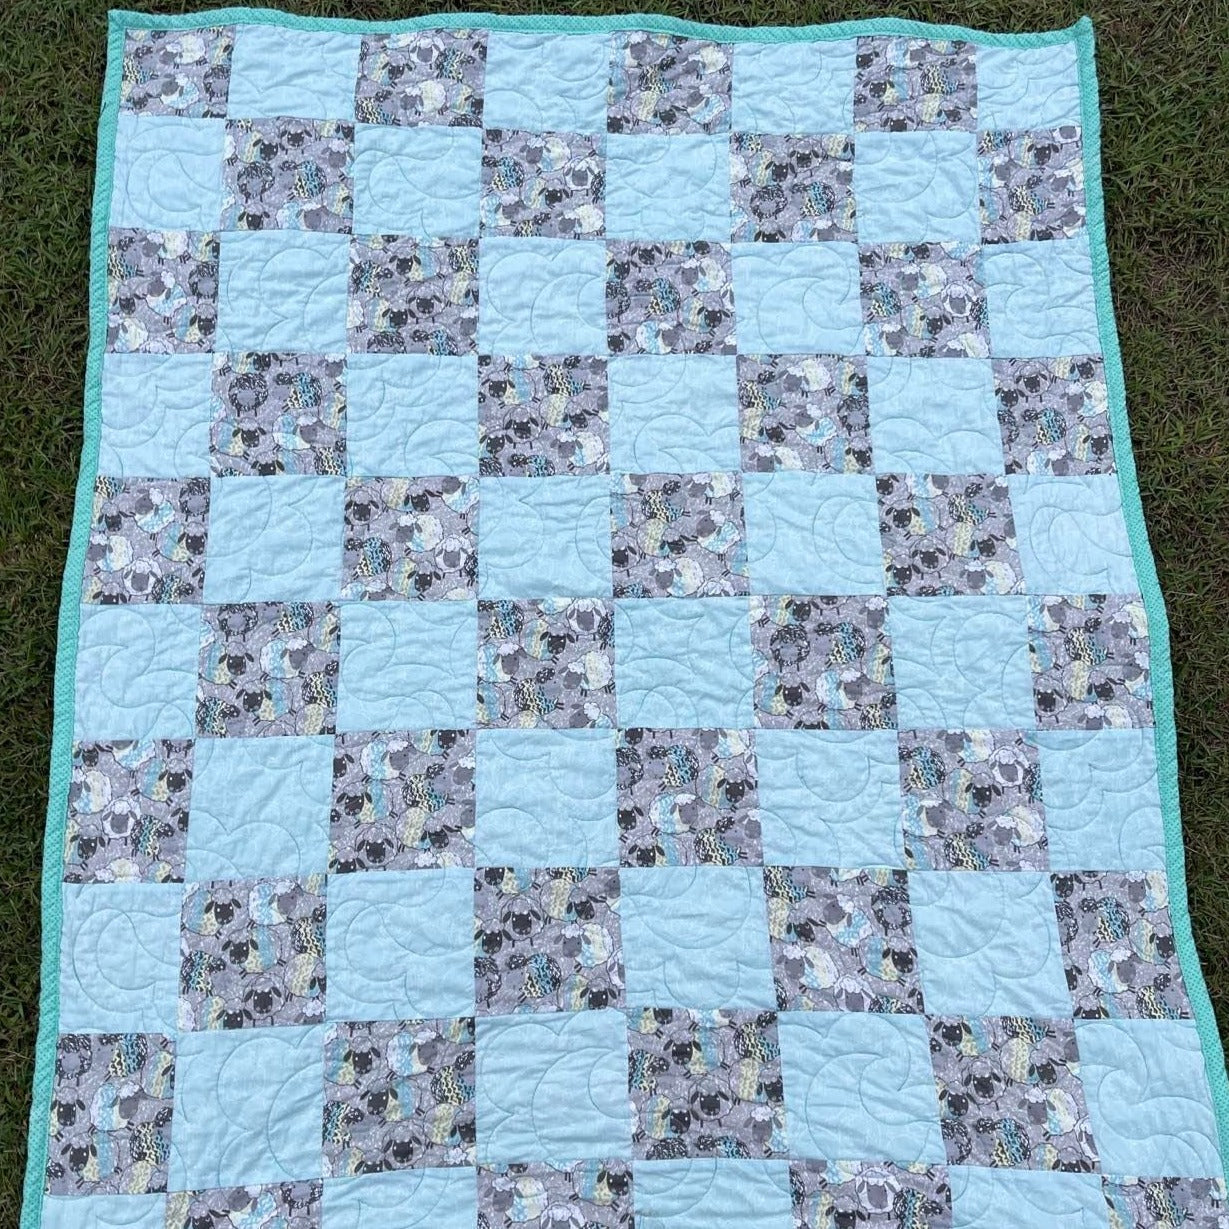 Stepping Stones Quilt Finished Size 34.5" x 42.5" Approx